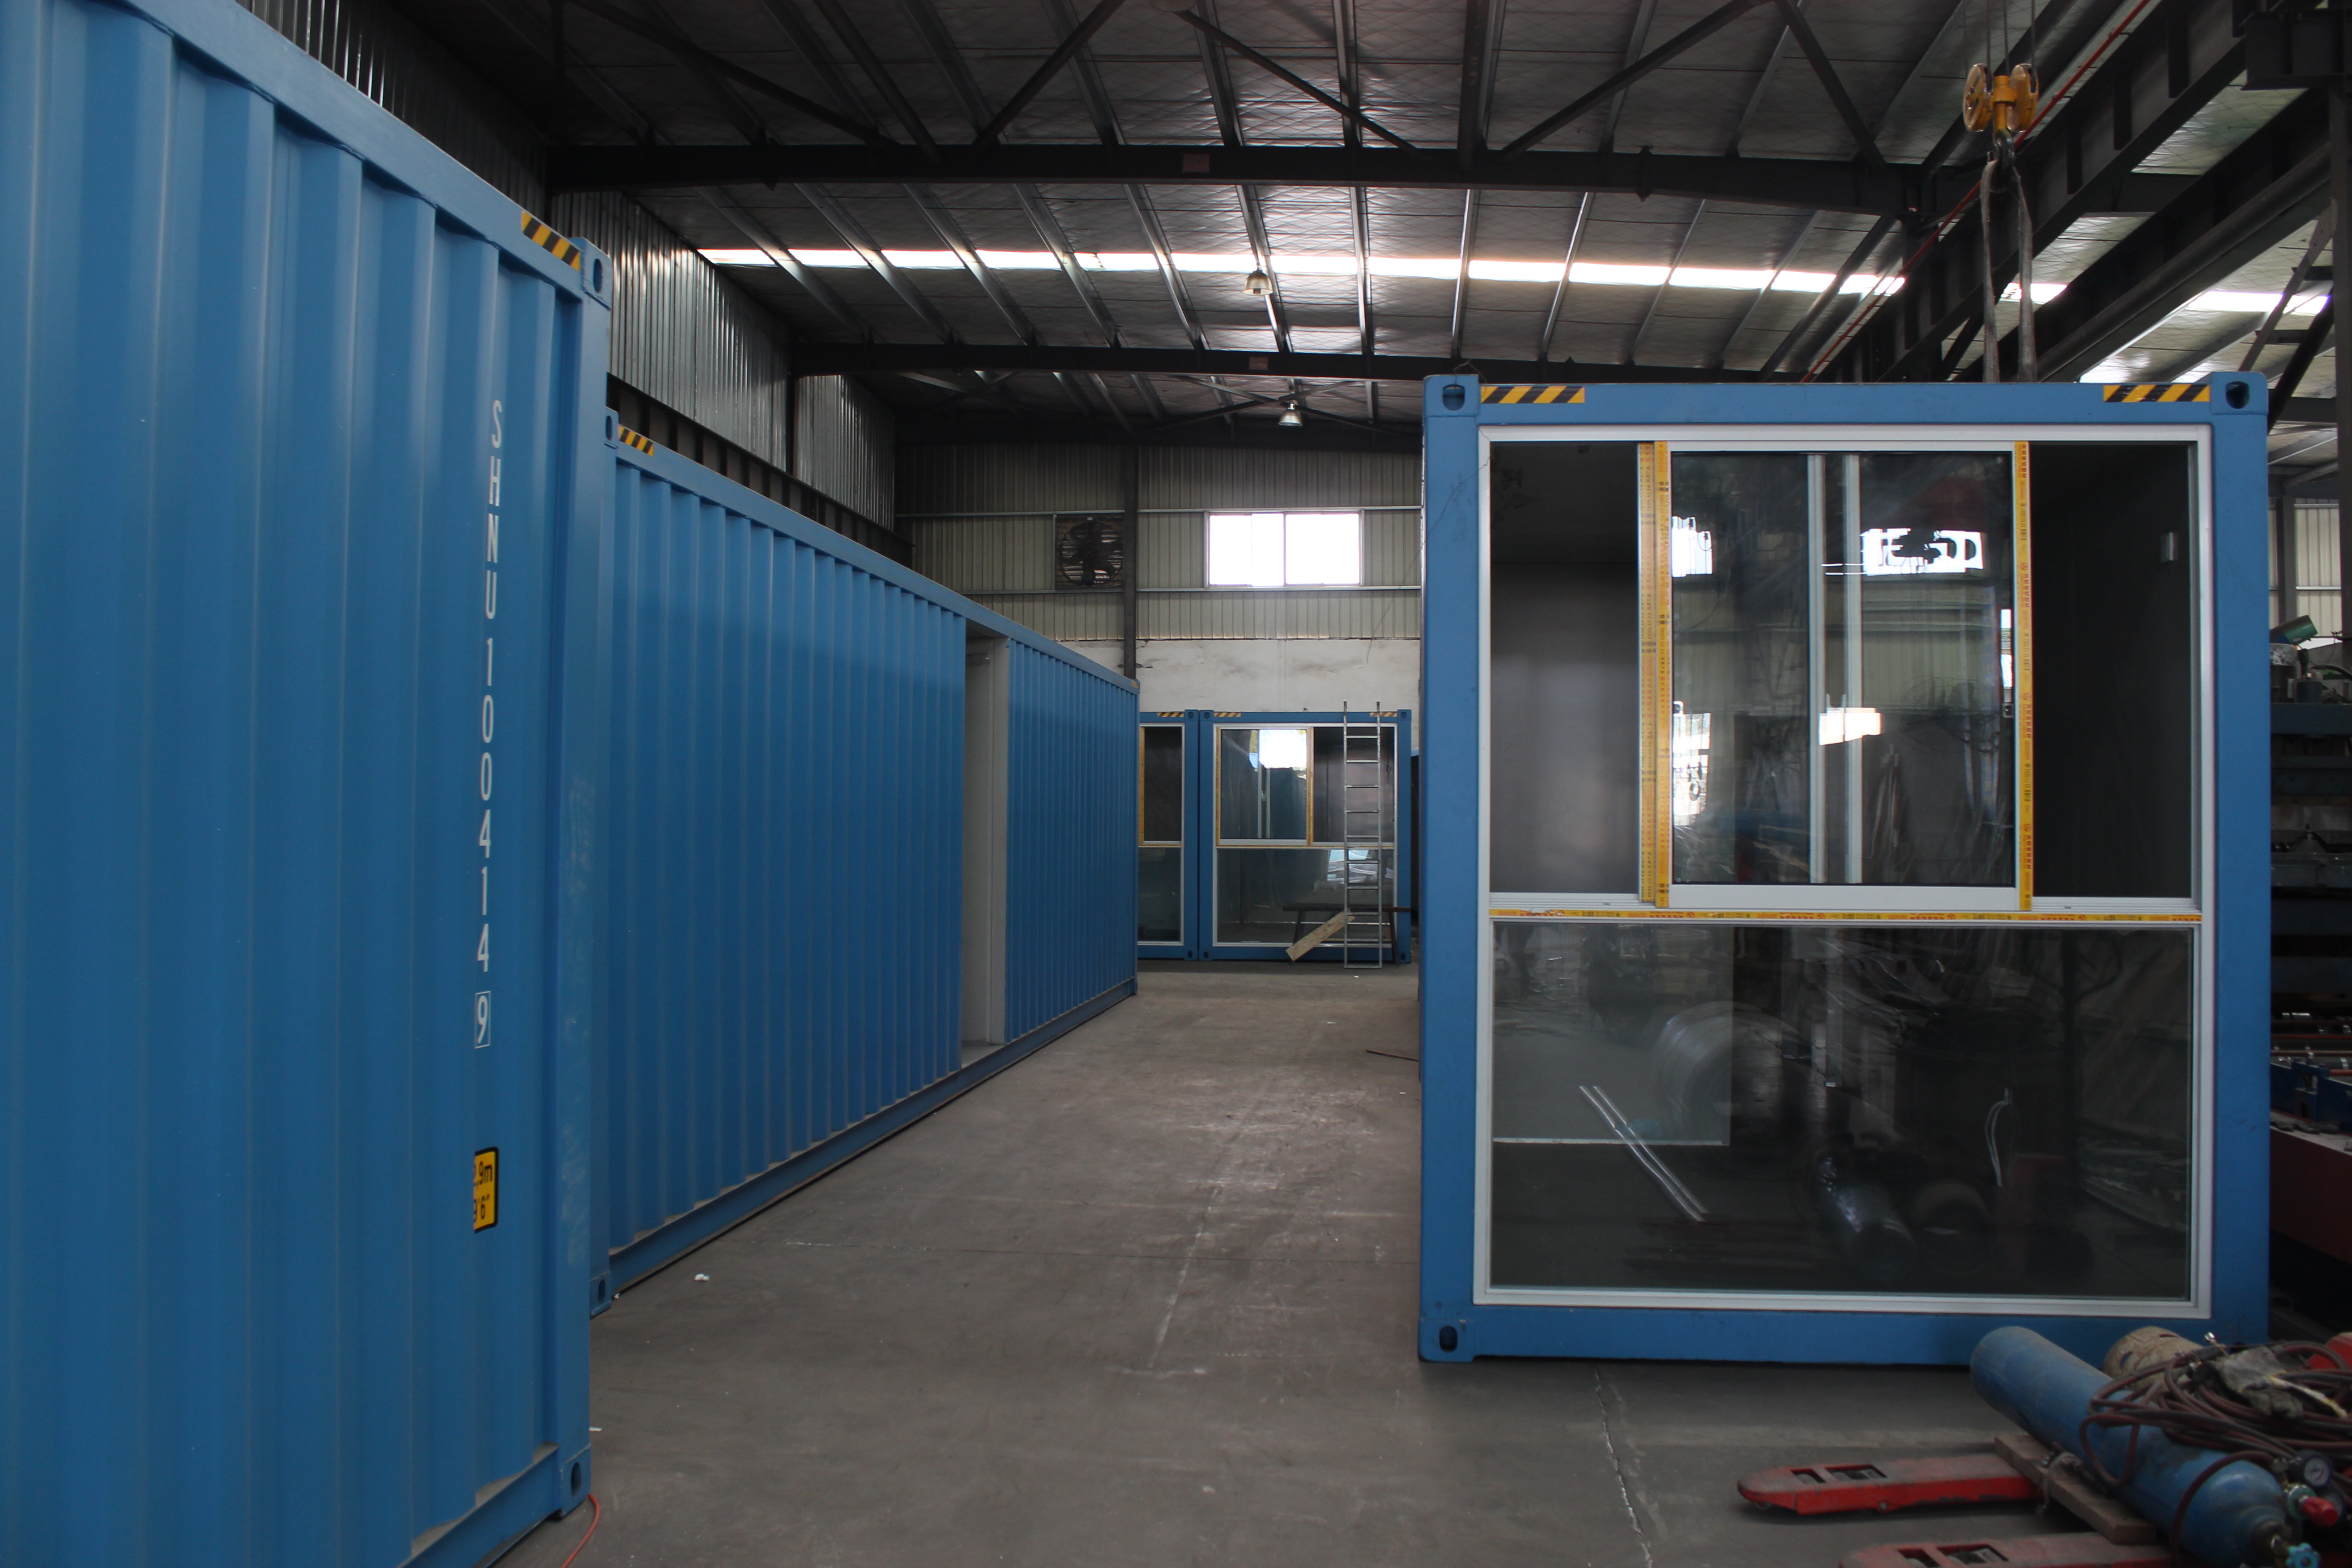 modular stackable storage containers, modular container manufacturer, modular container manufacturers, 3f modular hotel container manufacturer, 3f modular hotel container factory